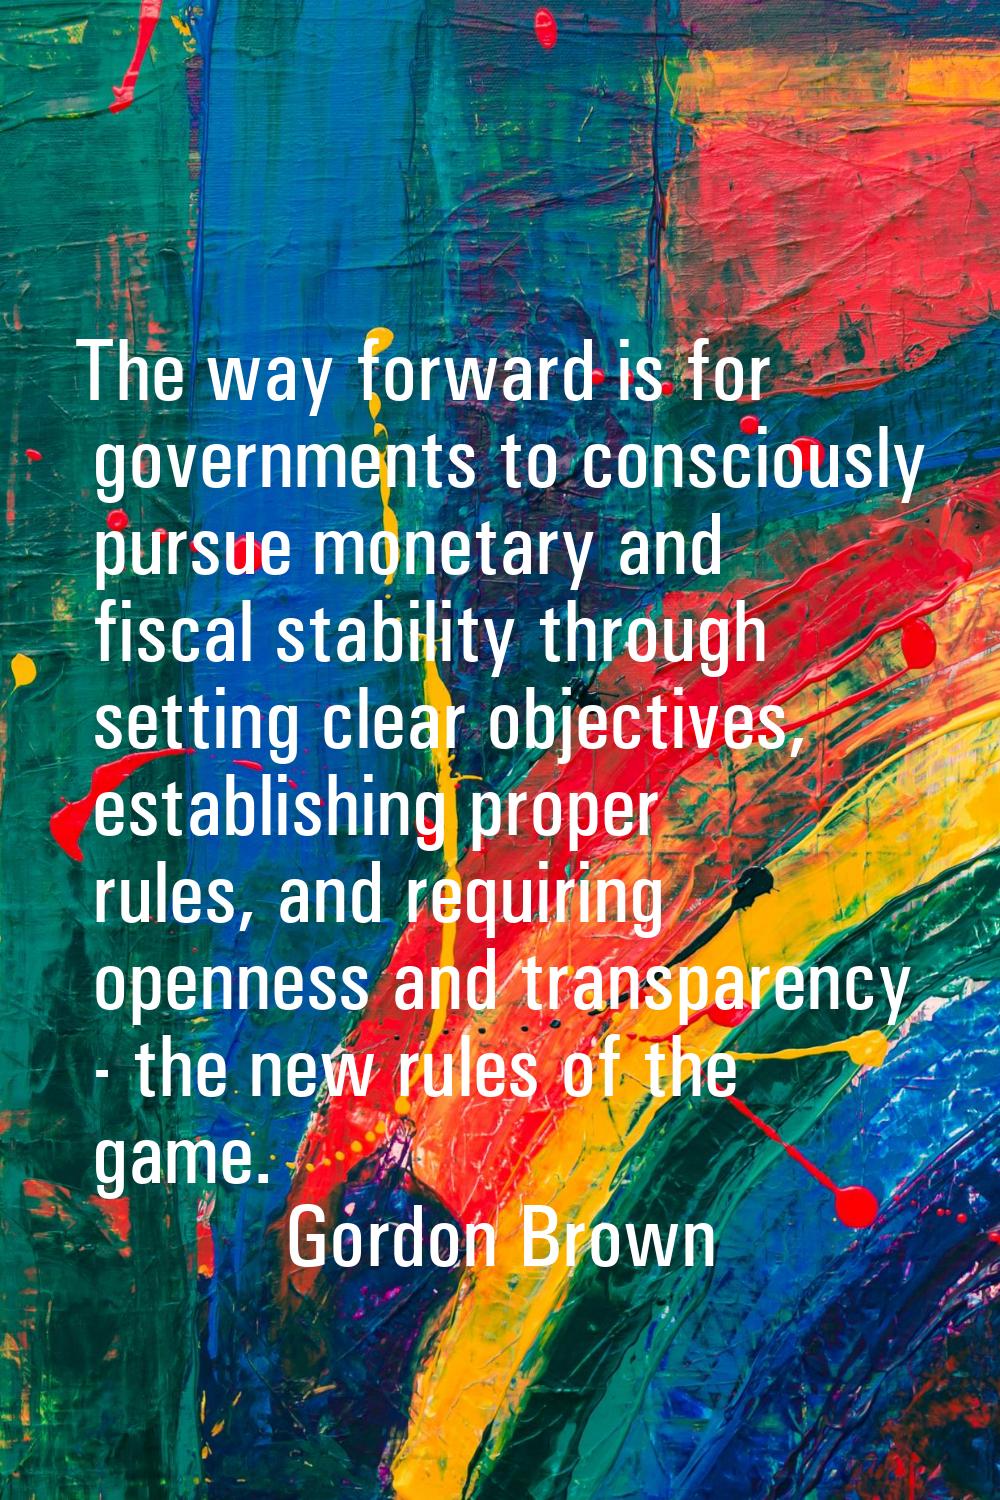 The way forward is for governments to consciously pursue monetary and fiscal stability through sett